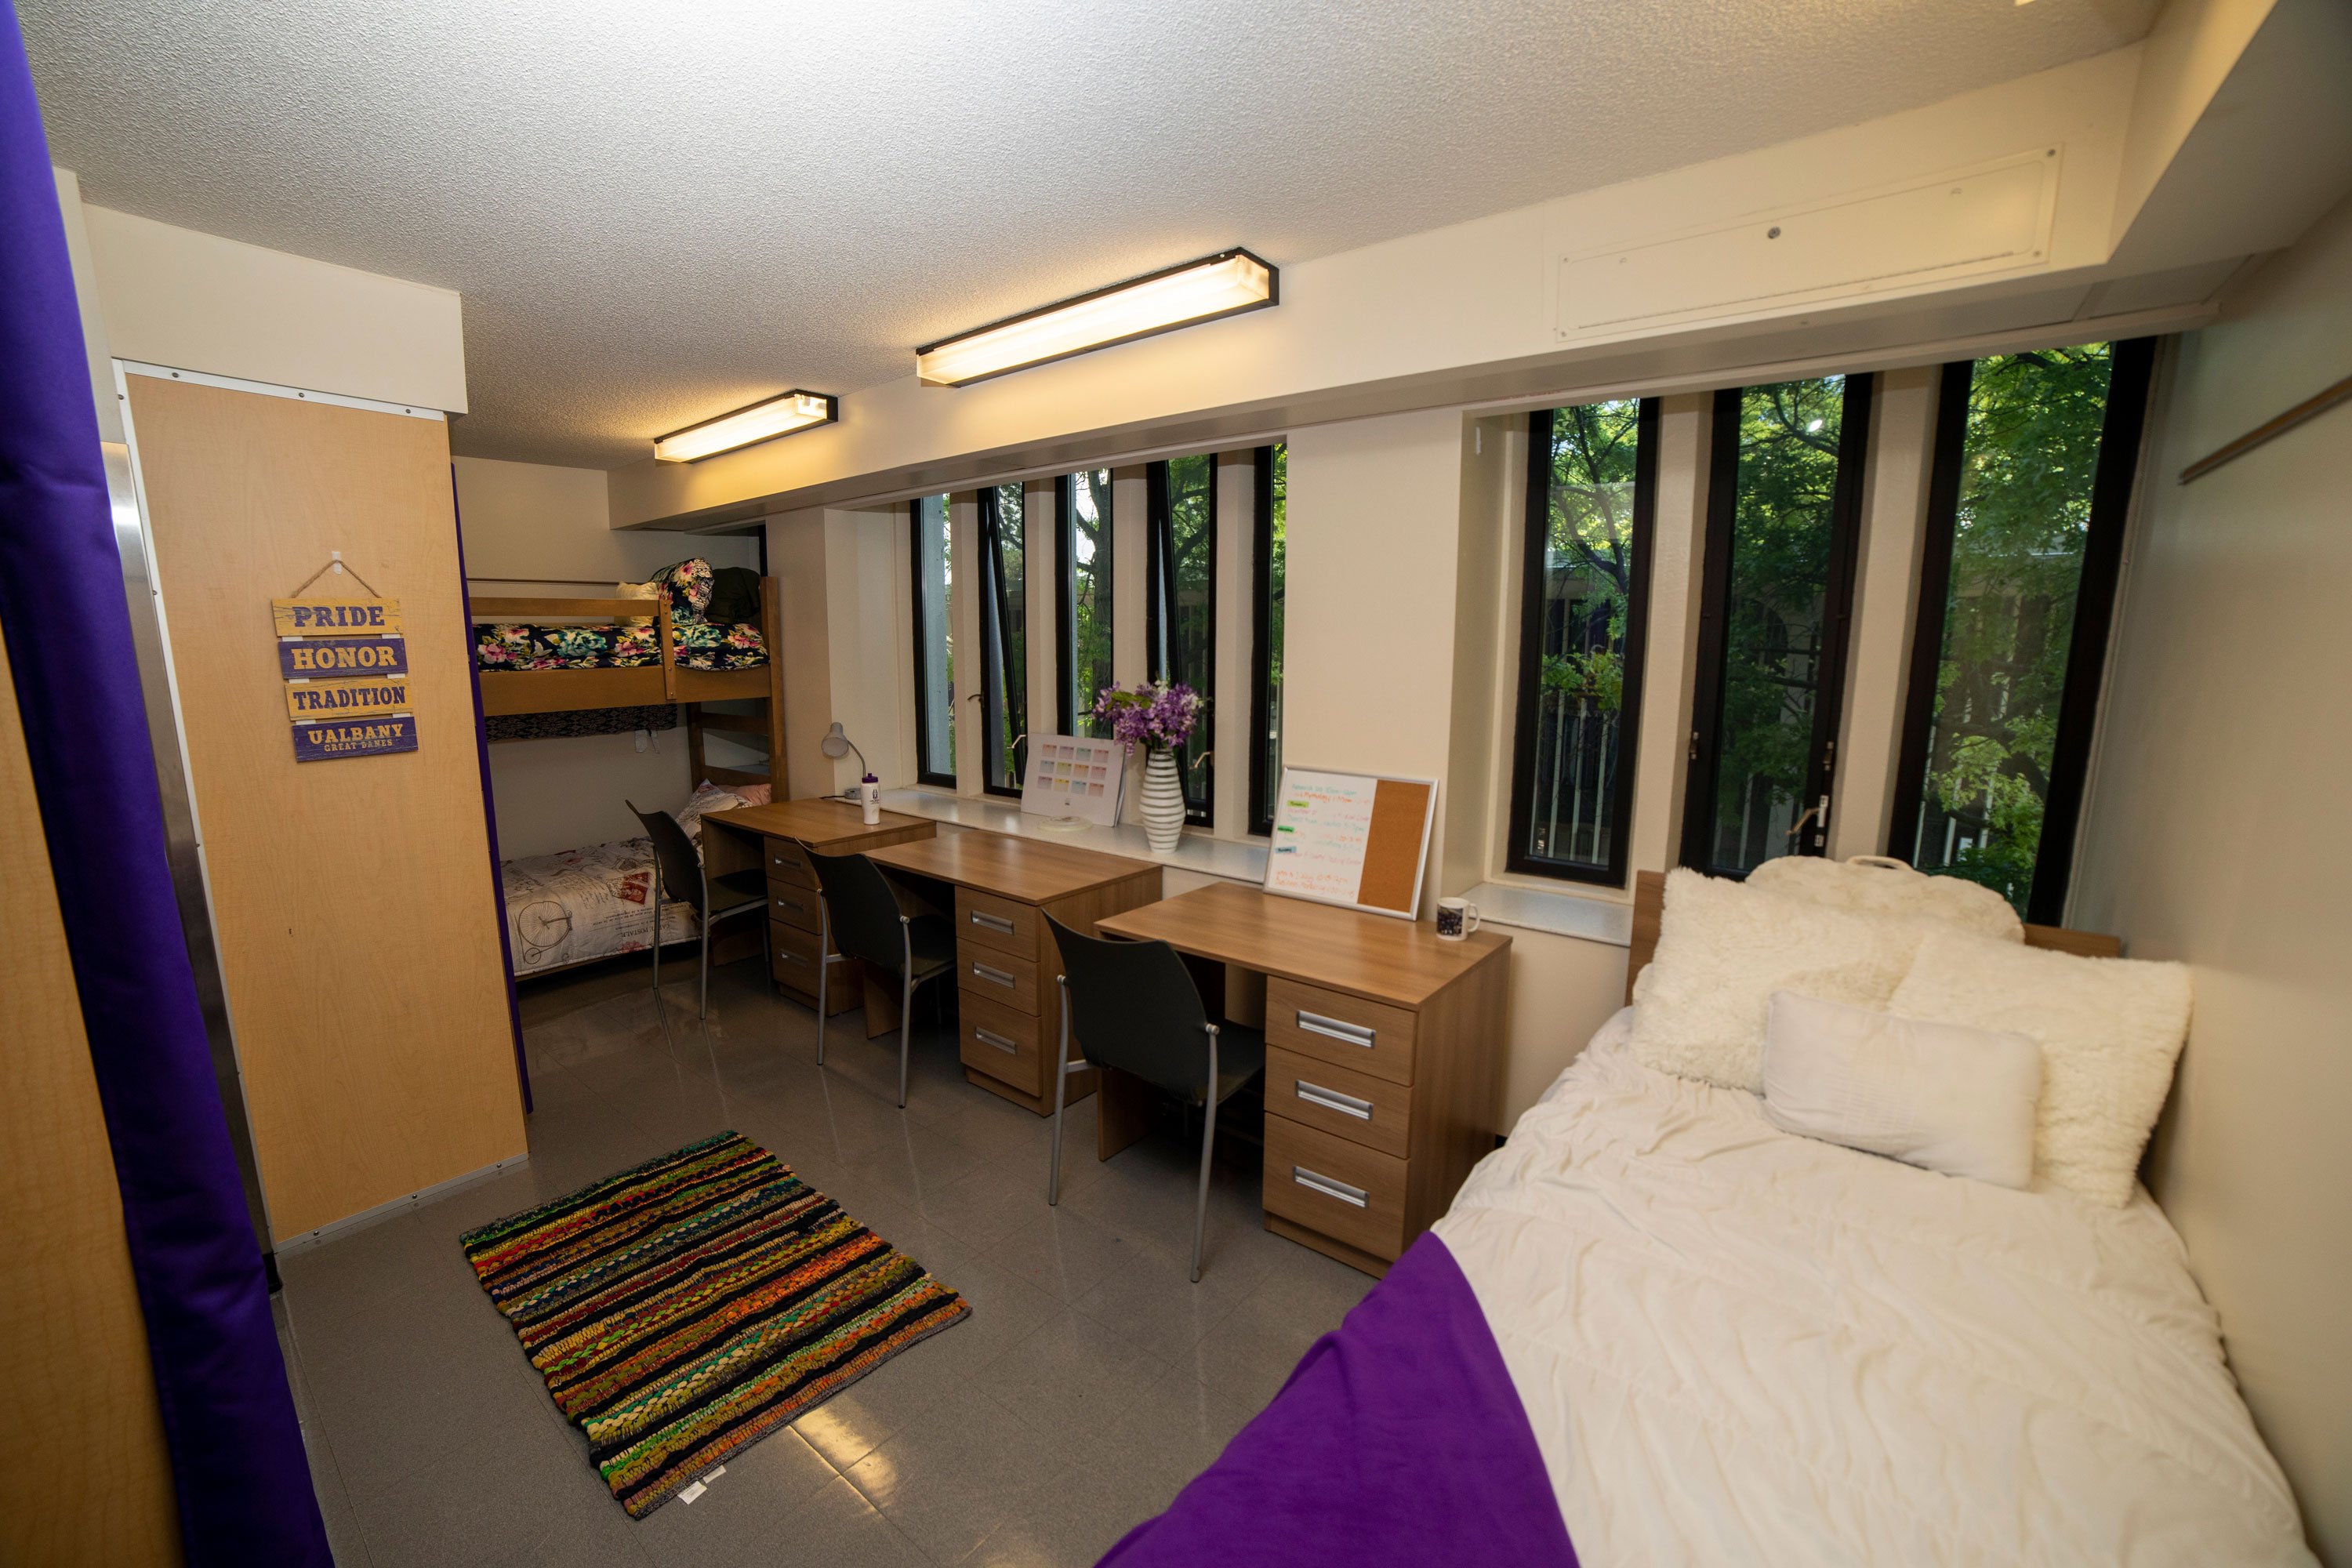 A triple bedroom, with a twin bed, twin bunk beds, three desks and three chairs.